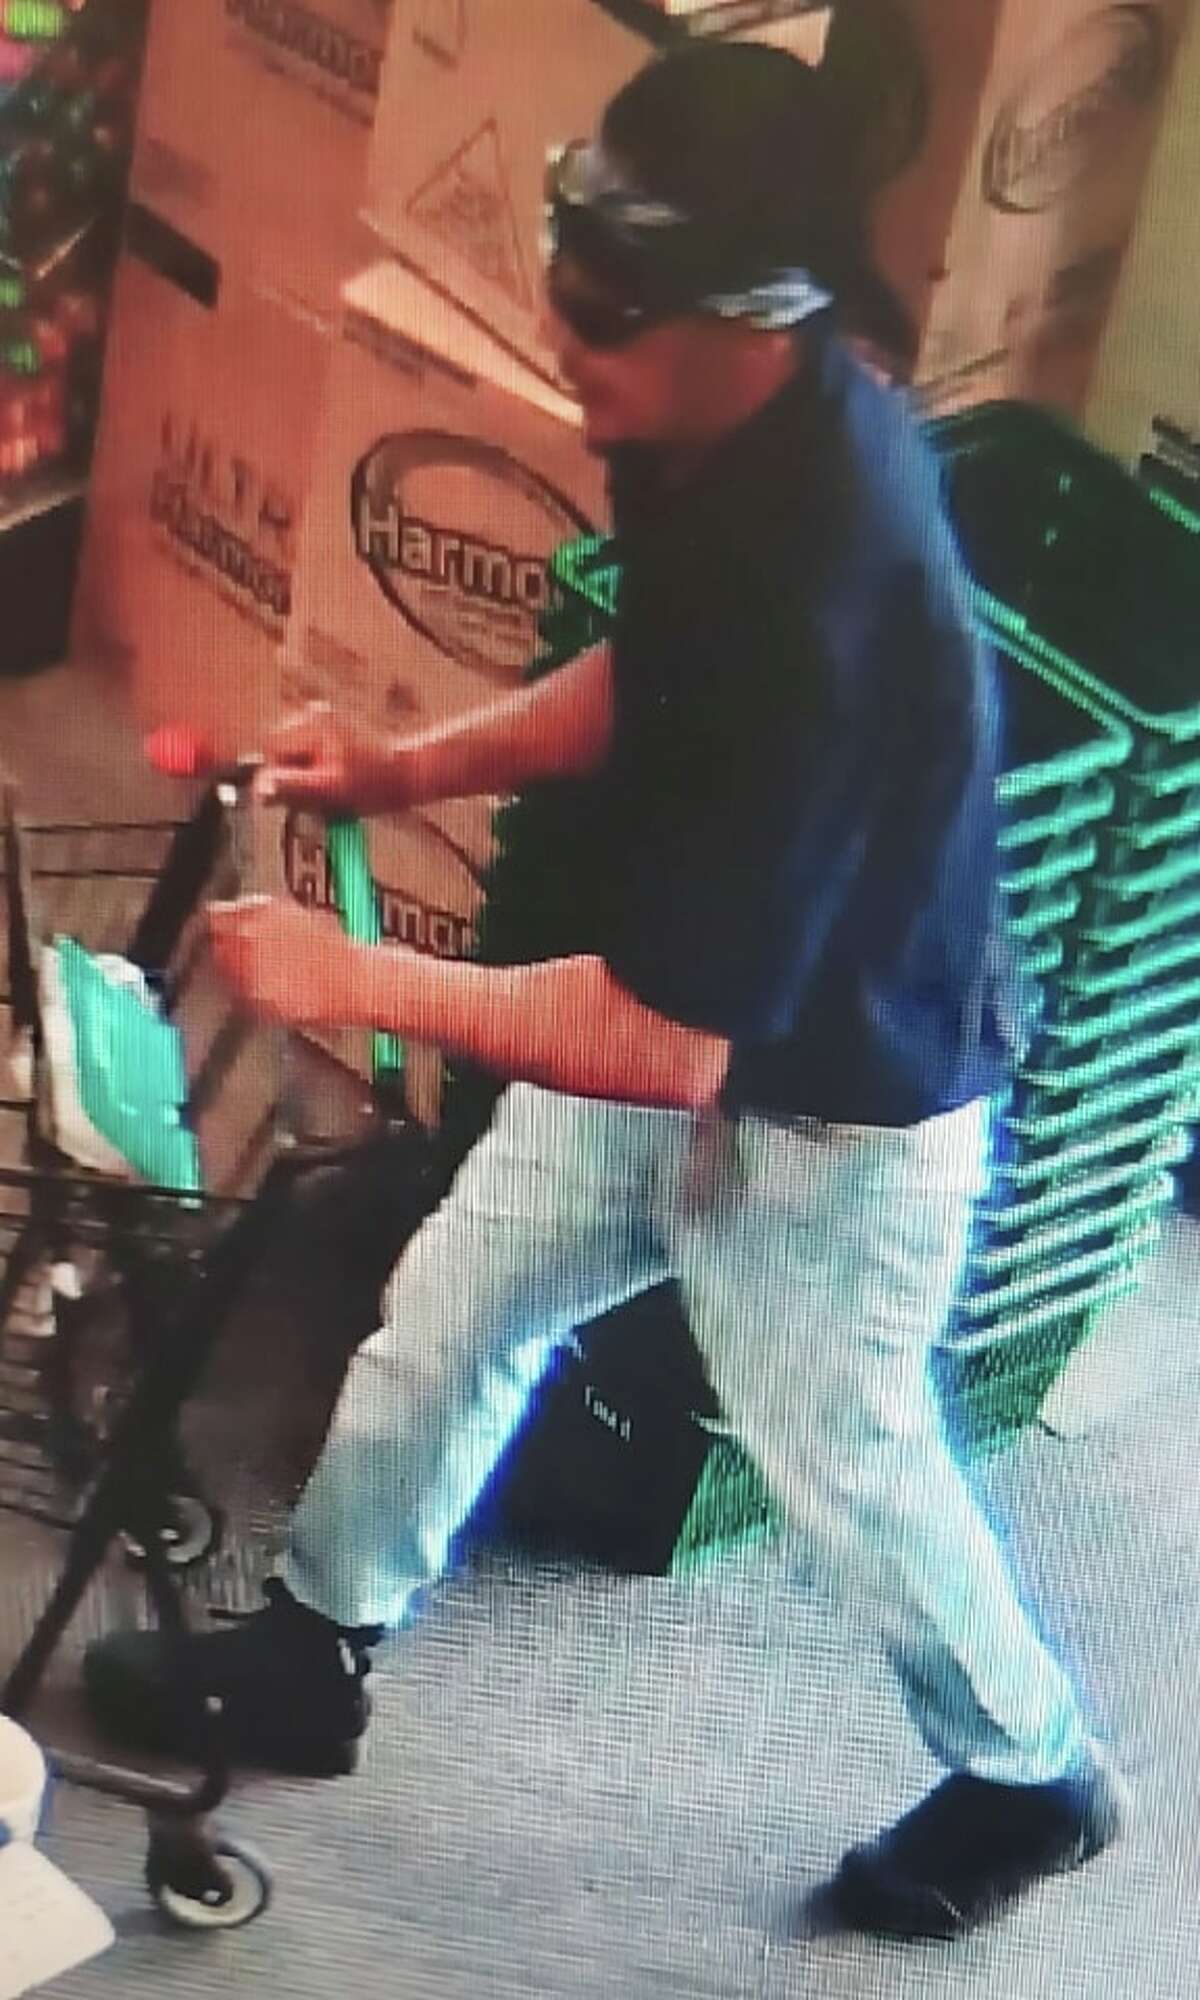 Laredo police said this man is wanted in relation to a felony that occurred at a local Dollar Tree. To provide information on the case, call Laredo Crime Stoppers at 727-TIPS (8477).